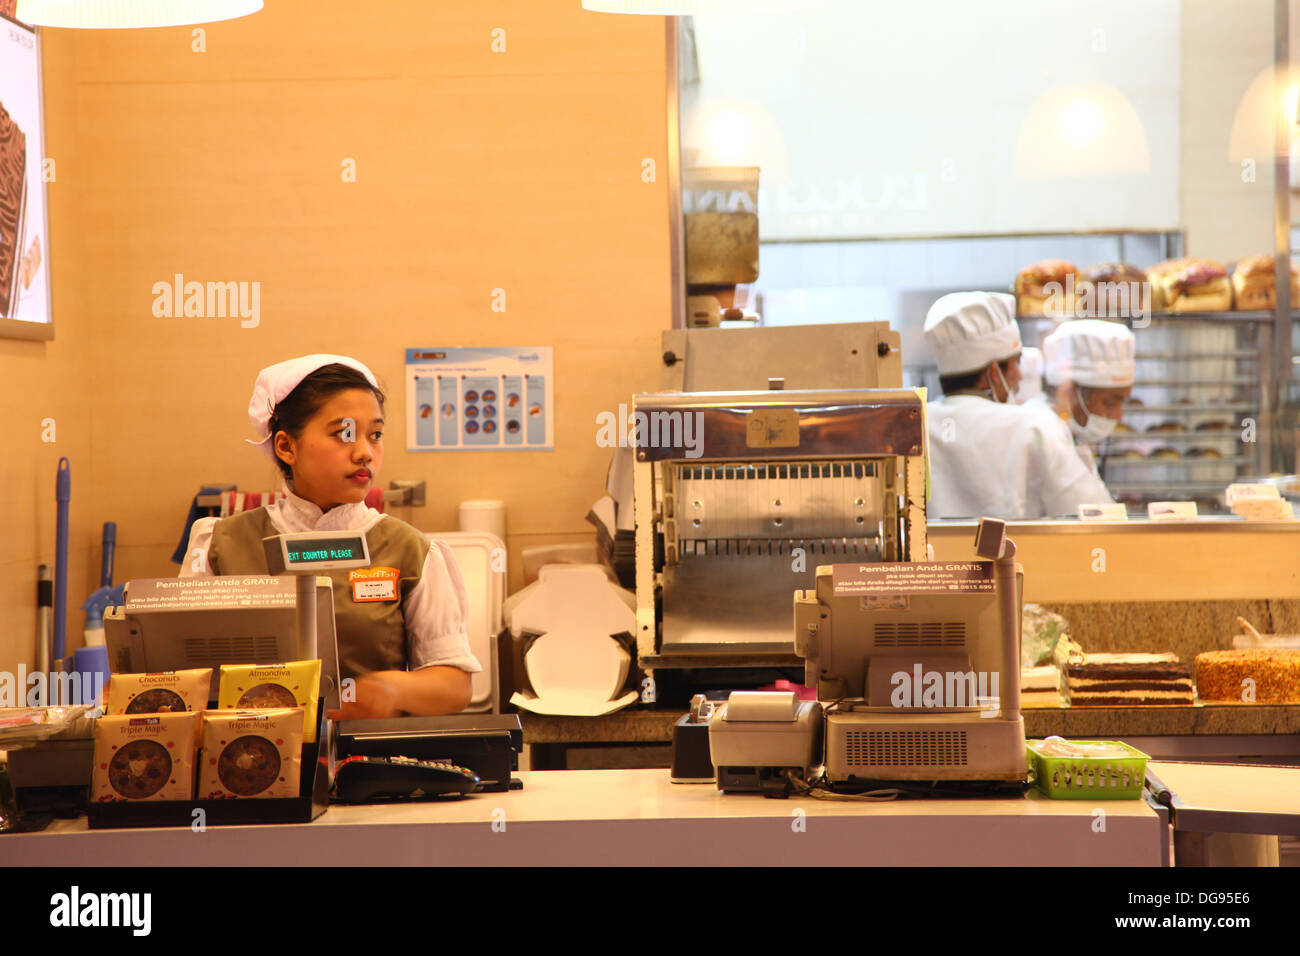 Cilandak Town Square, Jakarta, Indonesia - October 12, 2013: A female cashier on her post at BreadTalk Bakery in Cilandak Town S Stock Photo